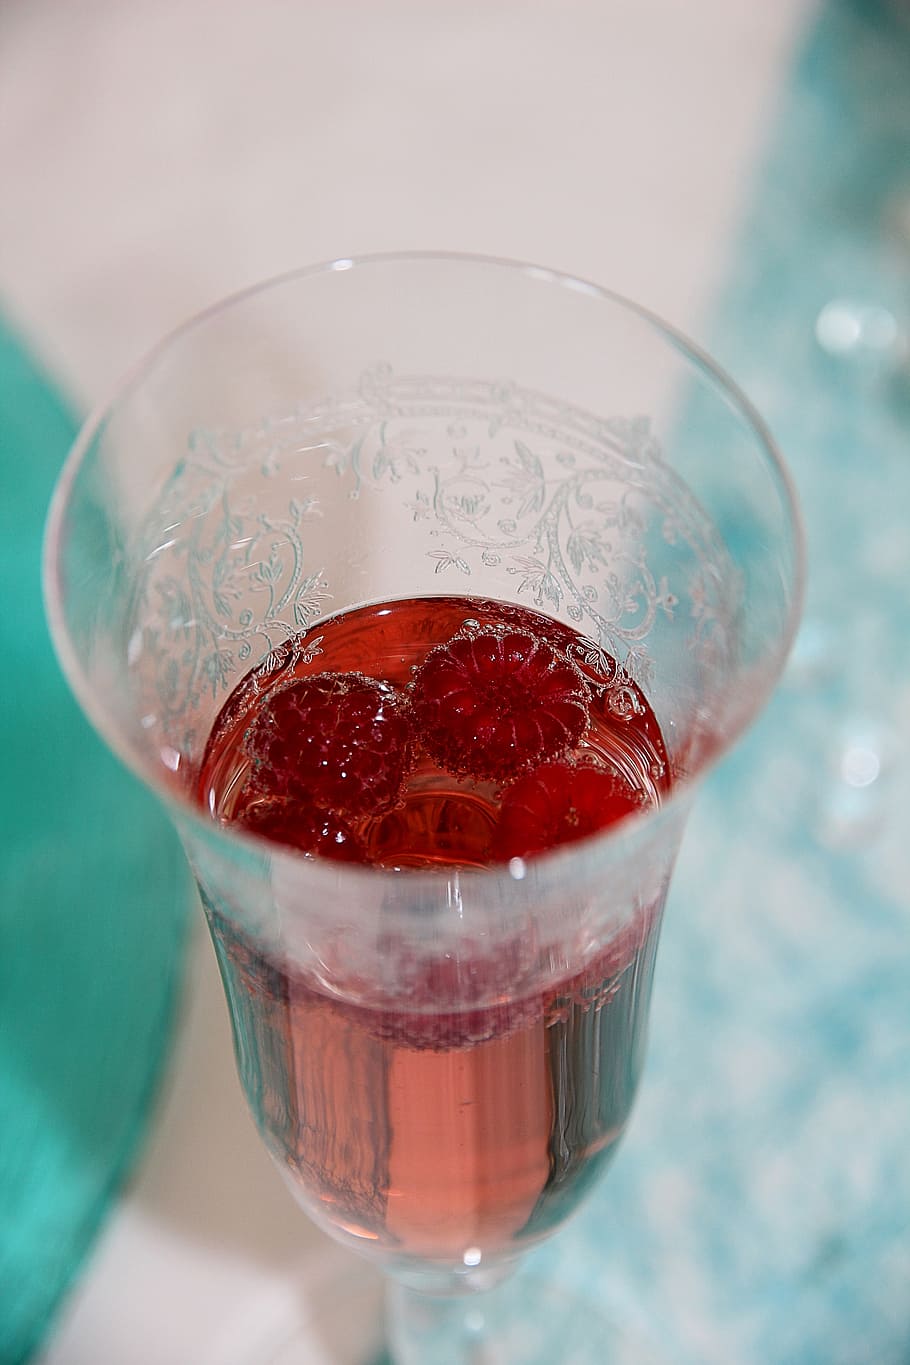 soaked, glass, champagne, sparkling, celebration, cup, abut, champagne glass, aperitif, raspberries